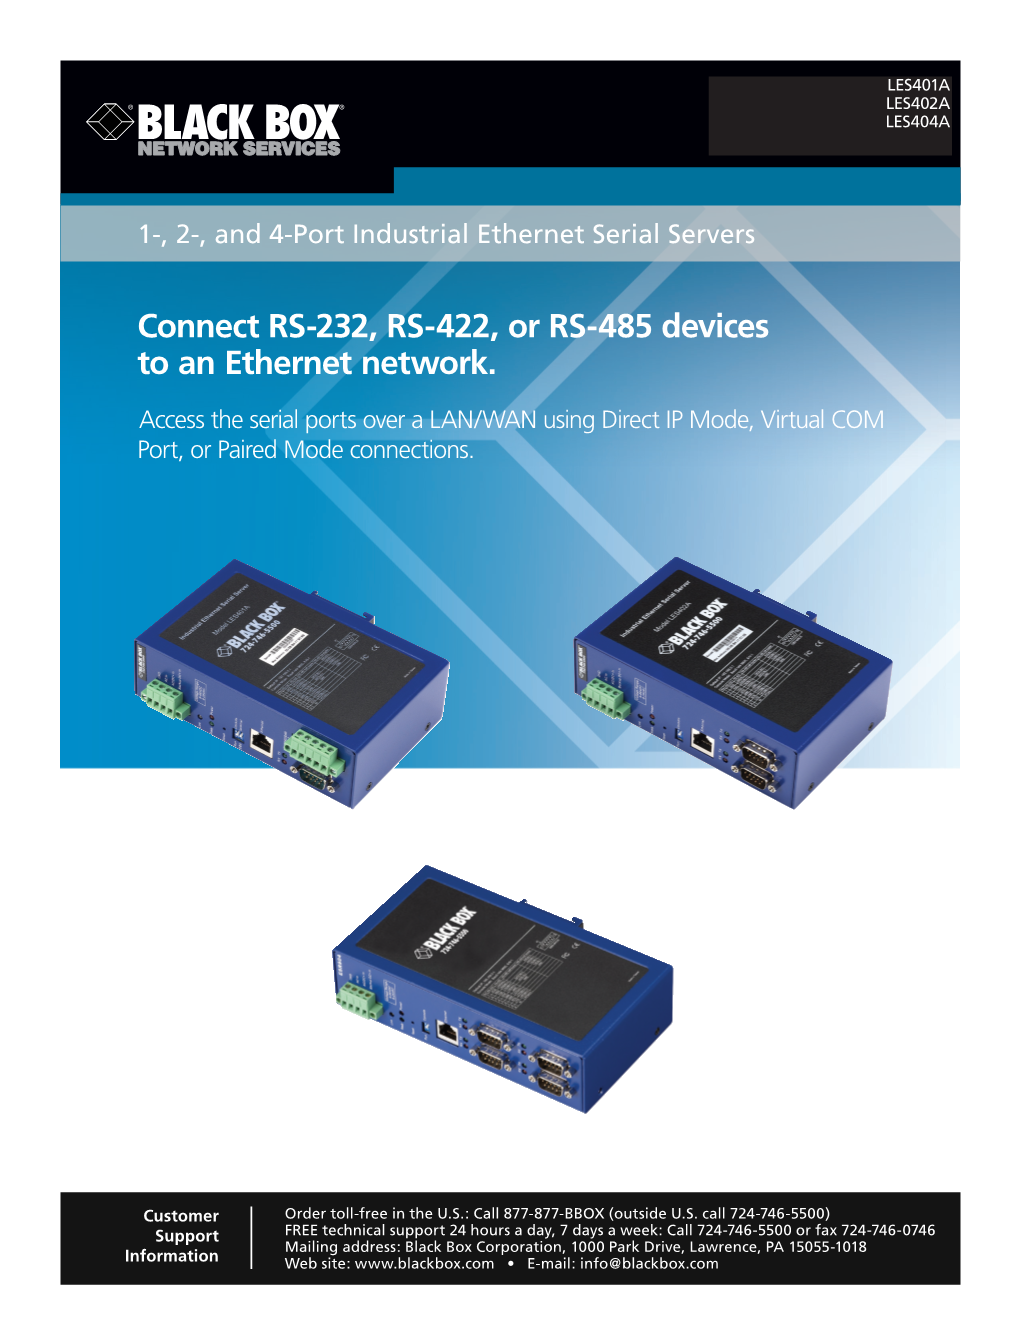 Connect RS-232, RS-422, Or RS-485 Devices to an Ethernet Network